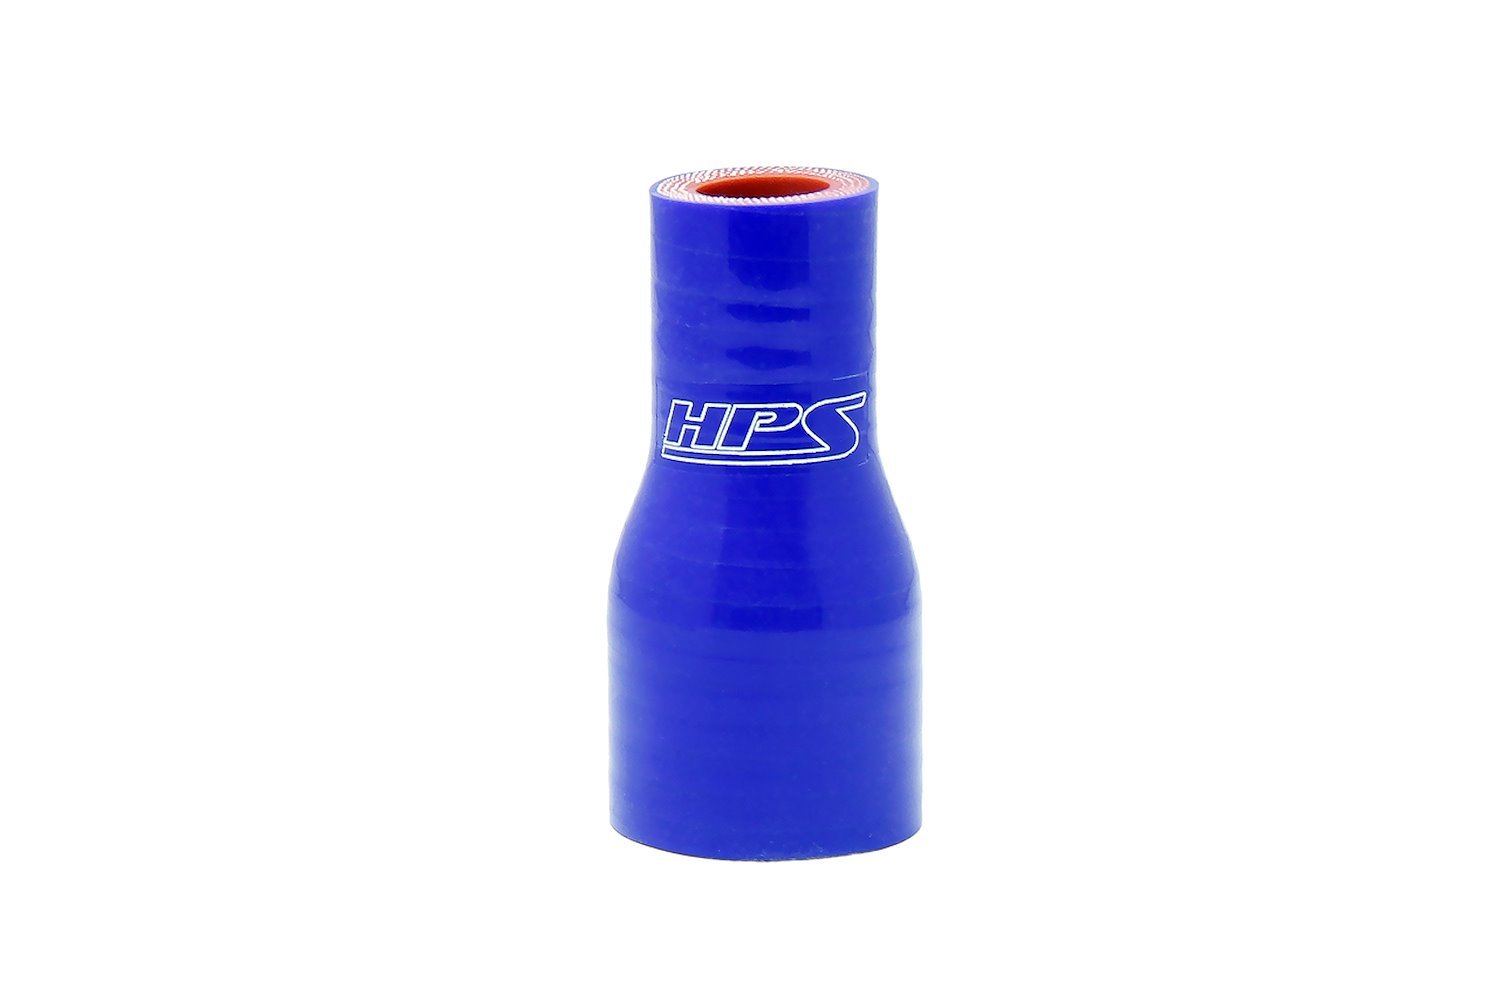 HTSR-100-175-L4-BLUE Silicone Reducer Hose, High-Temp 4-Ply Reinforced, 1 in. - 1-3/4 in. ID, 4 in. Long, Blue